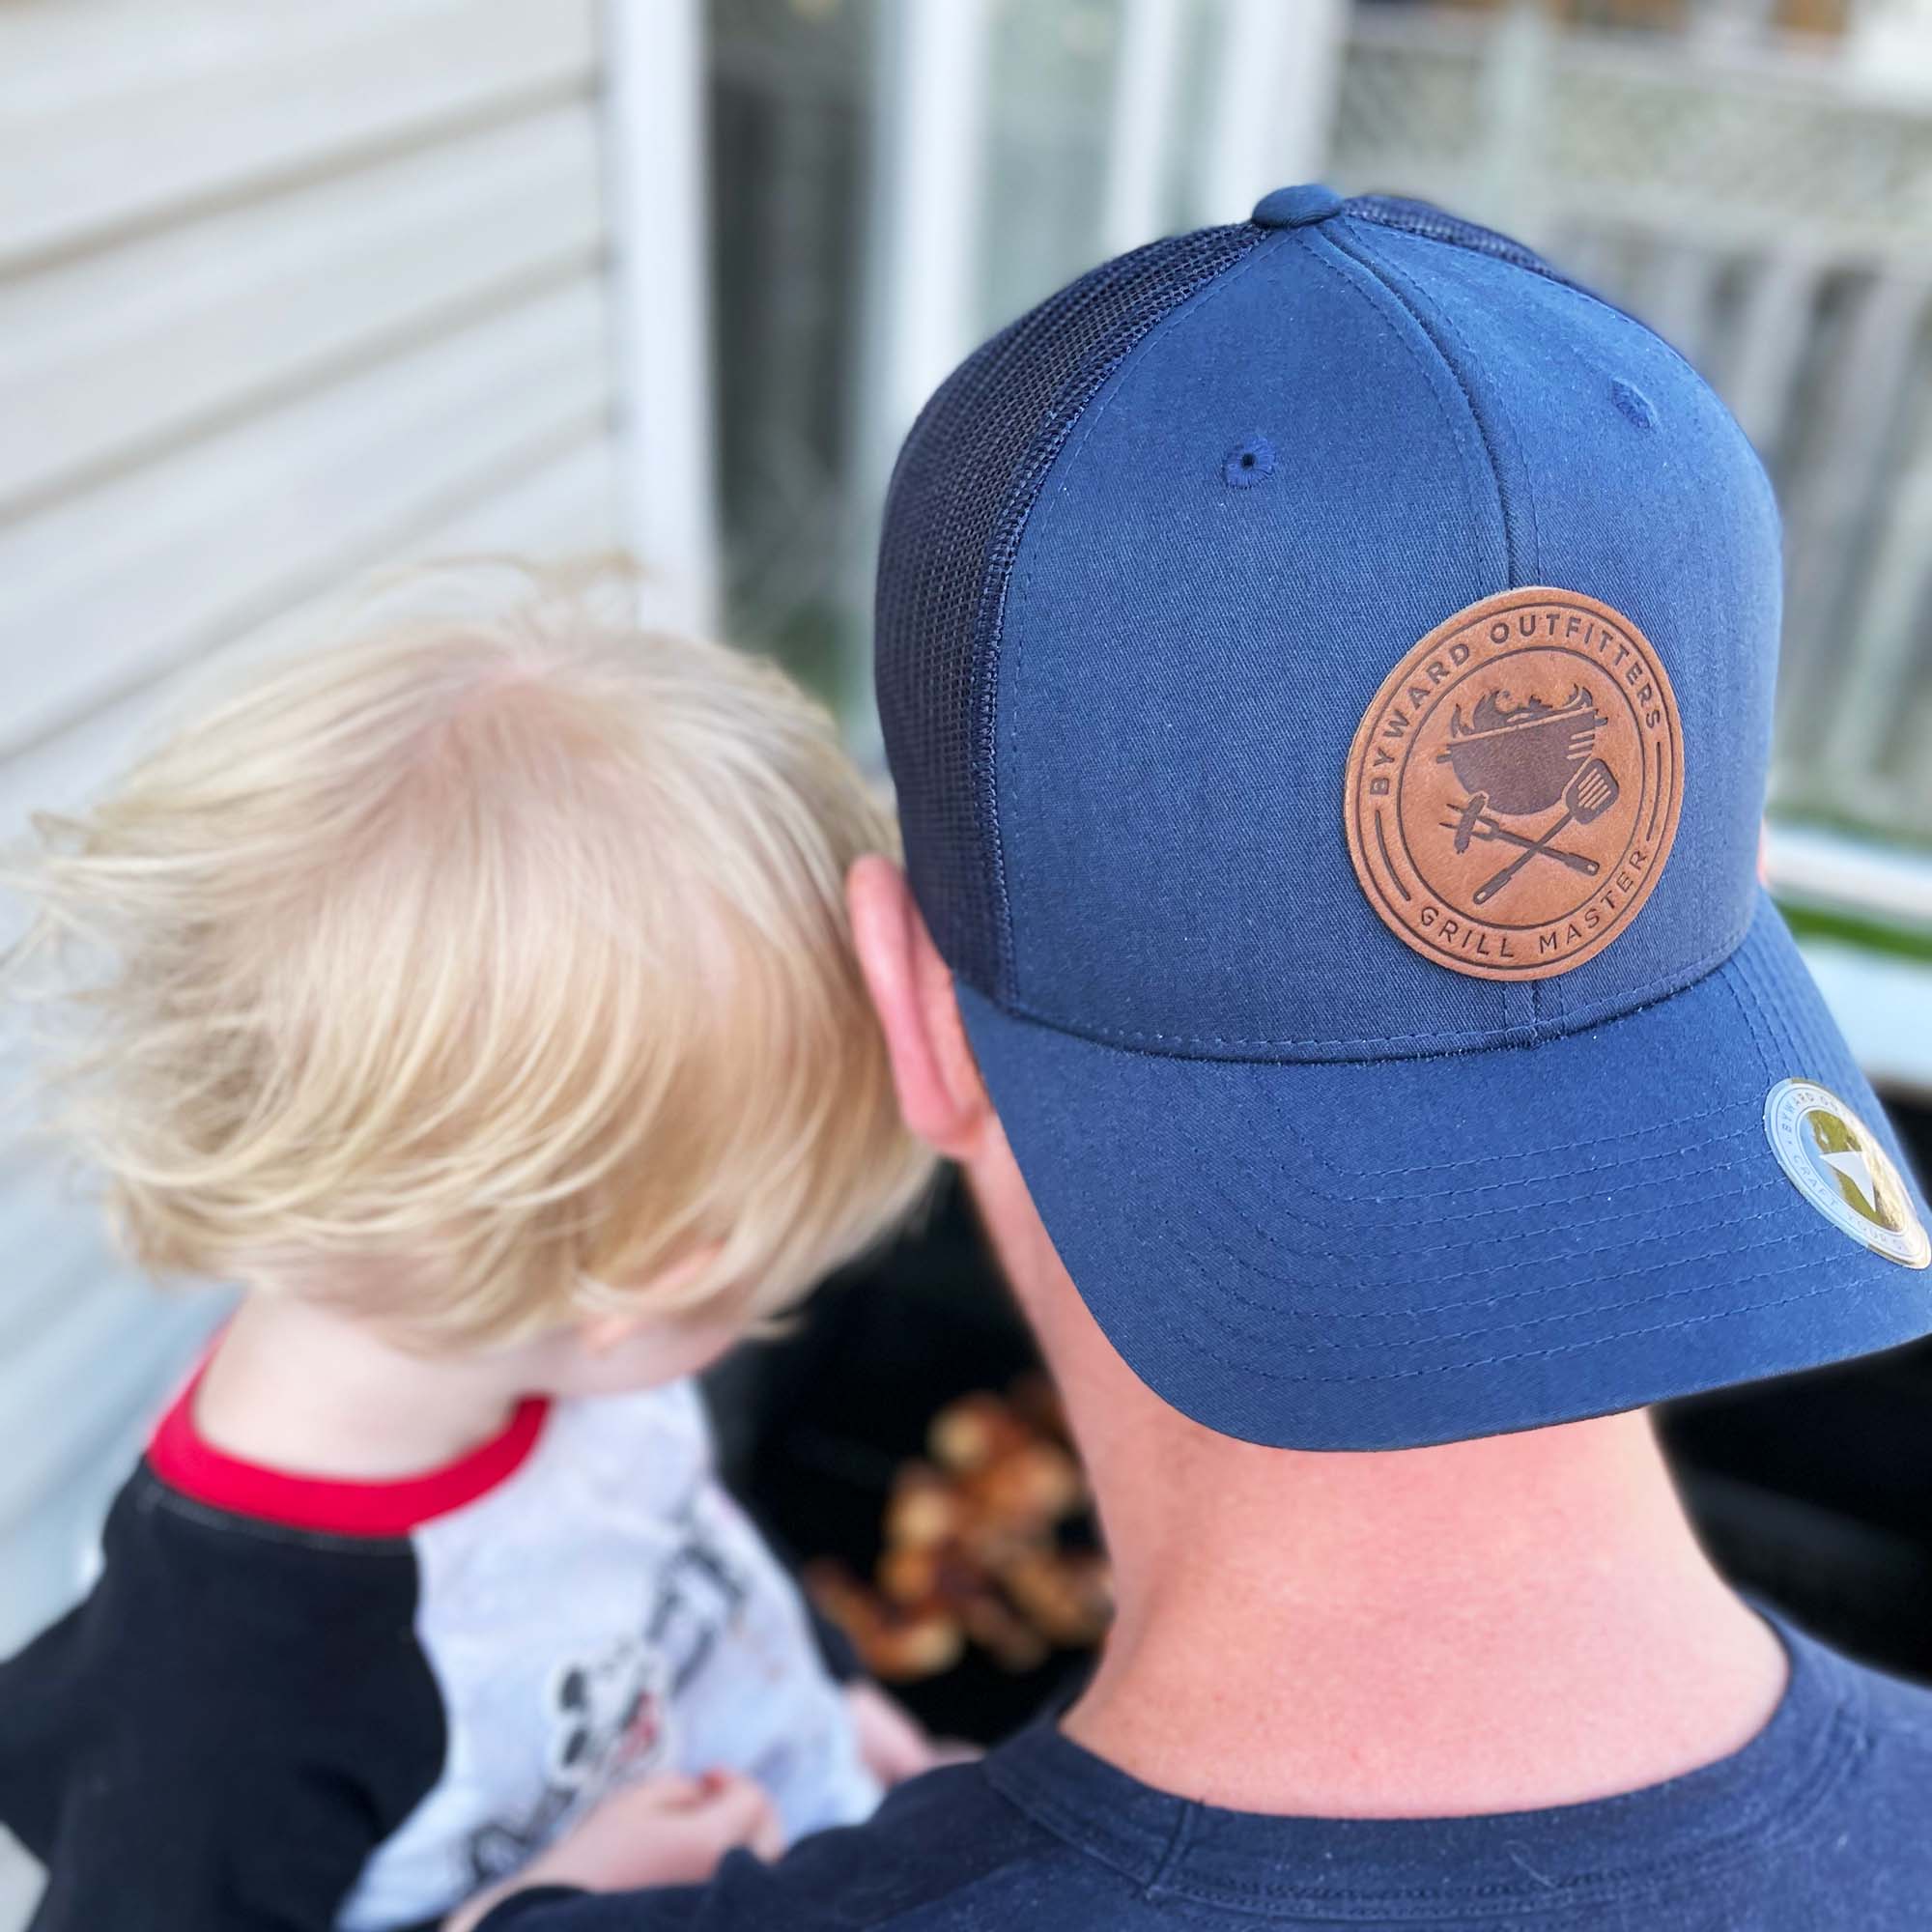 Navy trucker hat with full-grain leather patch of Grill Master | BLACK-006-002, CHARC-006-002, NAVY-006-002, HGREY-006-002, MOSS-006-002, BROWN-006-002